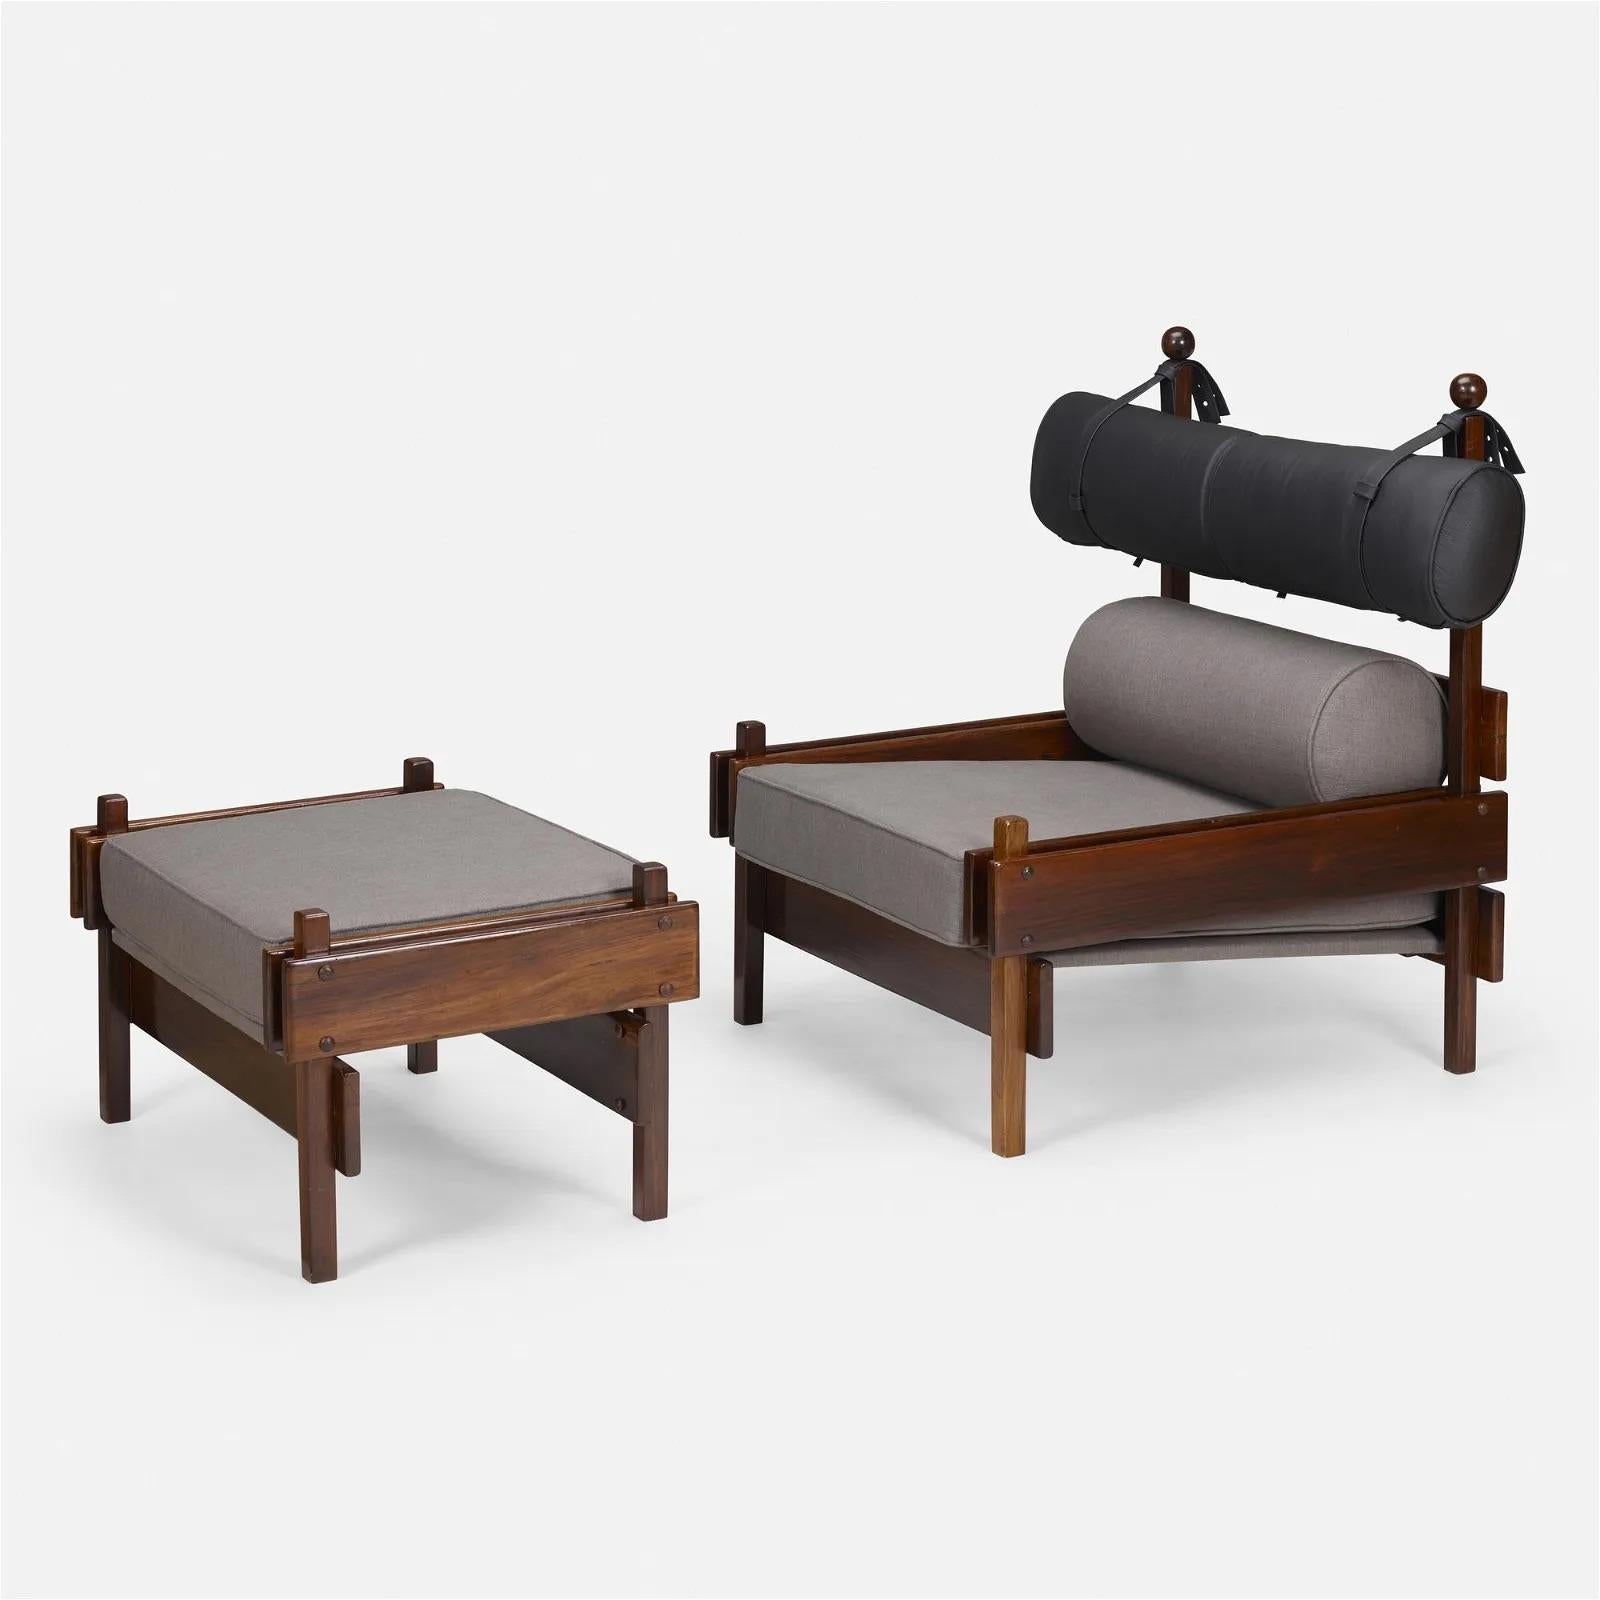 Stunning pair of Tonico lounge chairs designed by Sergio Rodrigues with matching ottomans. Made by Oca for Meia Pataca in Brazil, these chairs and ottomans are made of solid Jacaranda and feature an extremely comfortable seat and seat back cushion